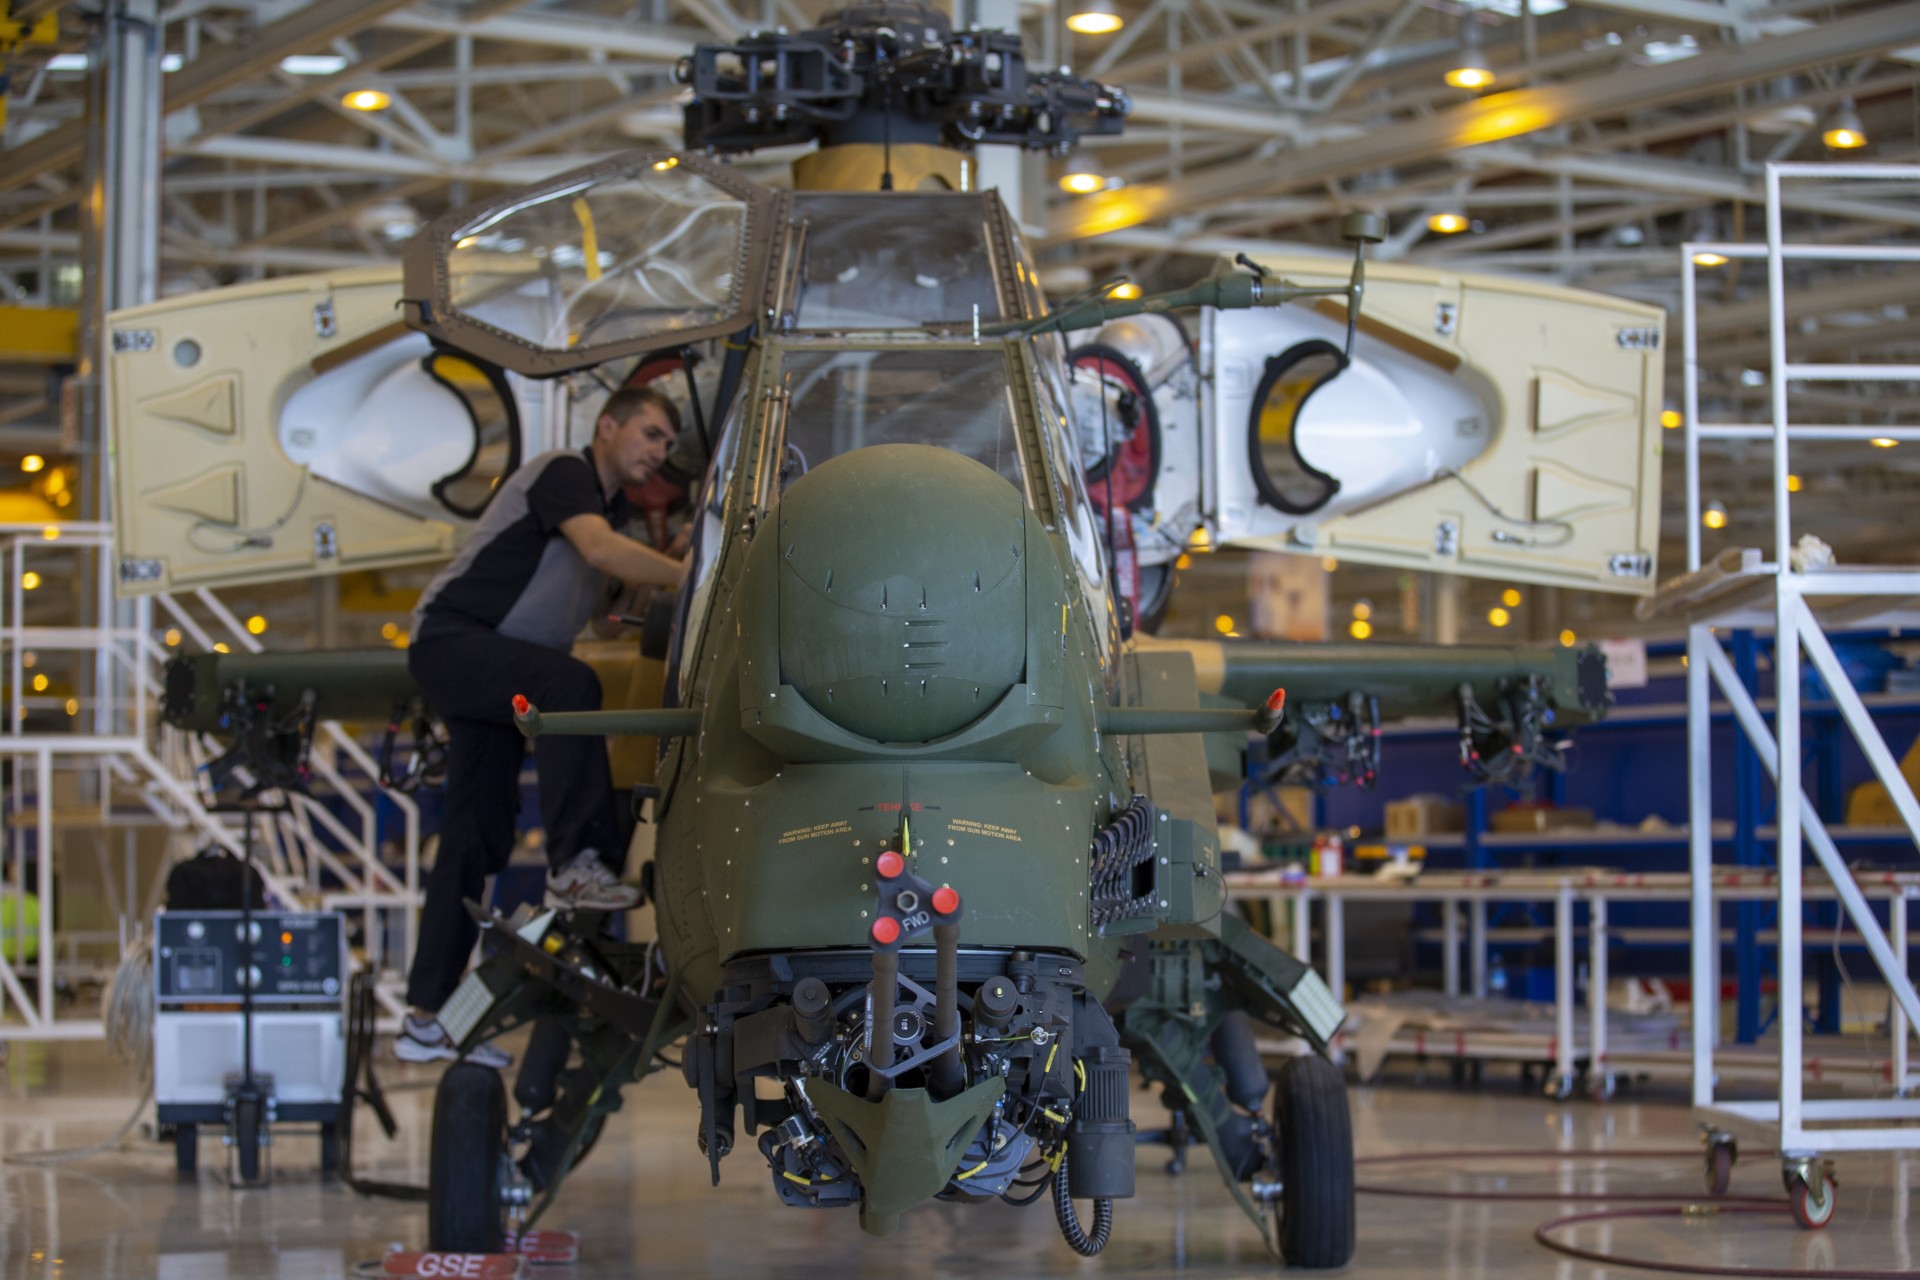 Production of ATAK Helicopters|image-8|image-9|image-10|image-11|image-12|image-13|image-14|image-15